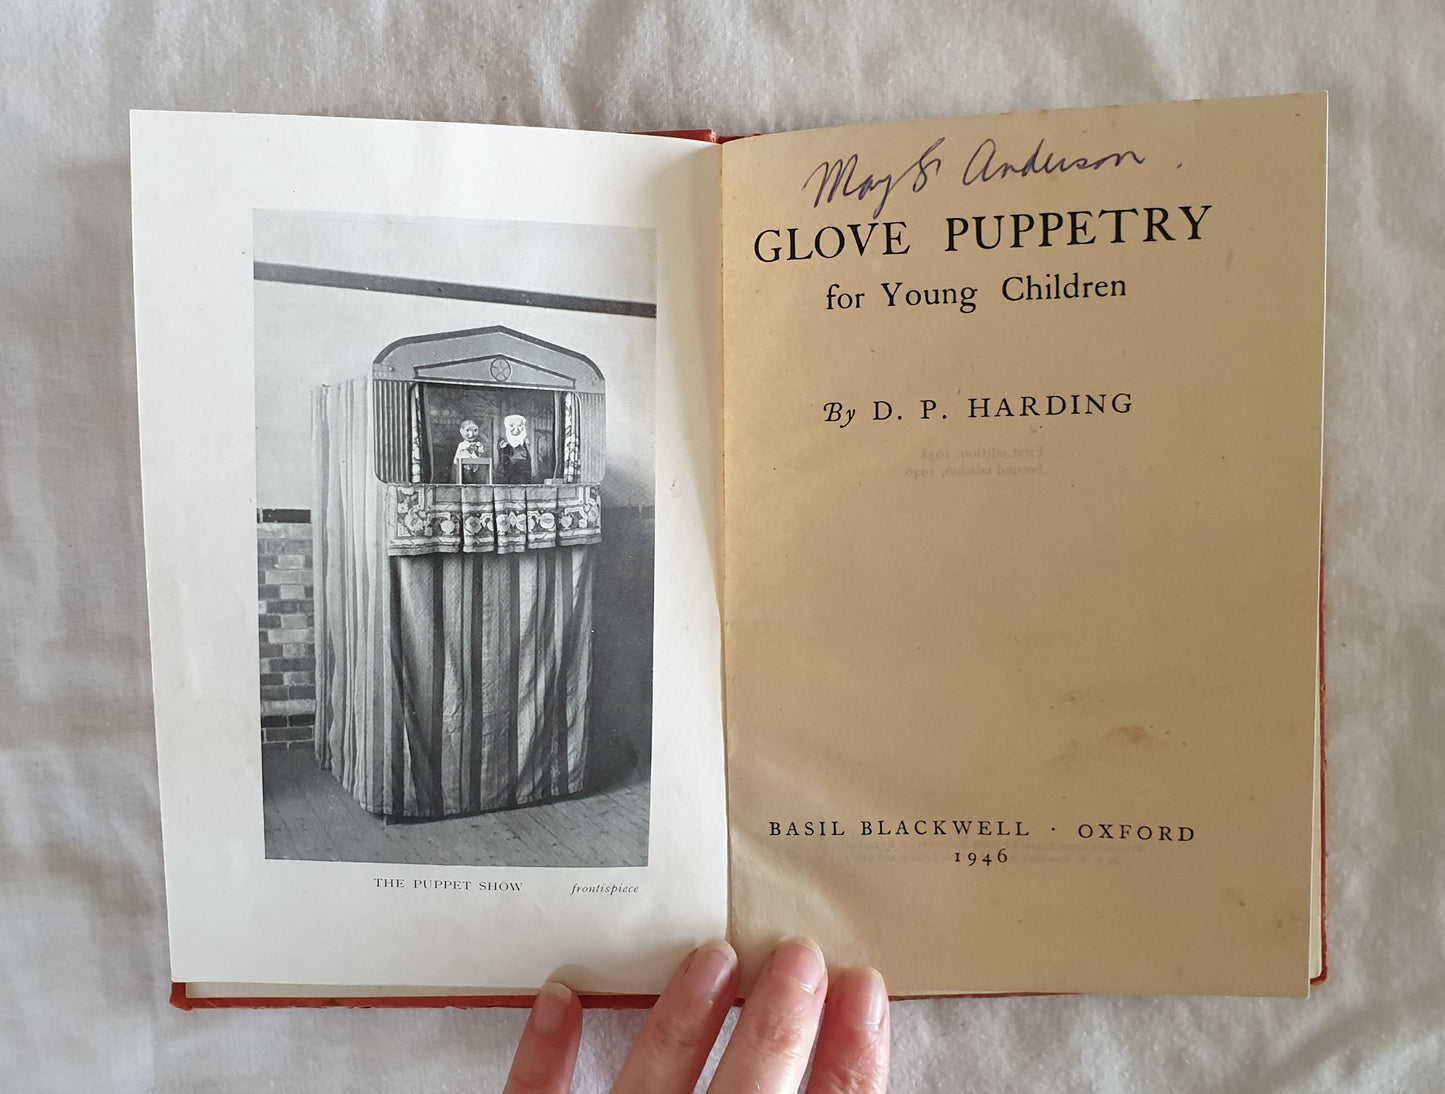 Glove Puppetry for Young Children by D. P. Harding